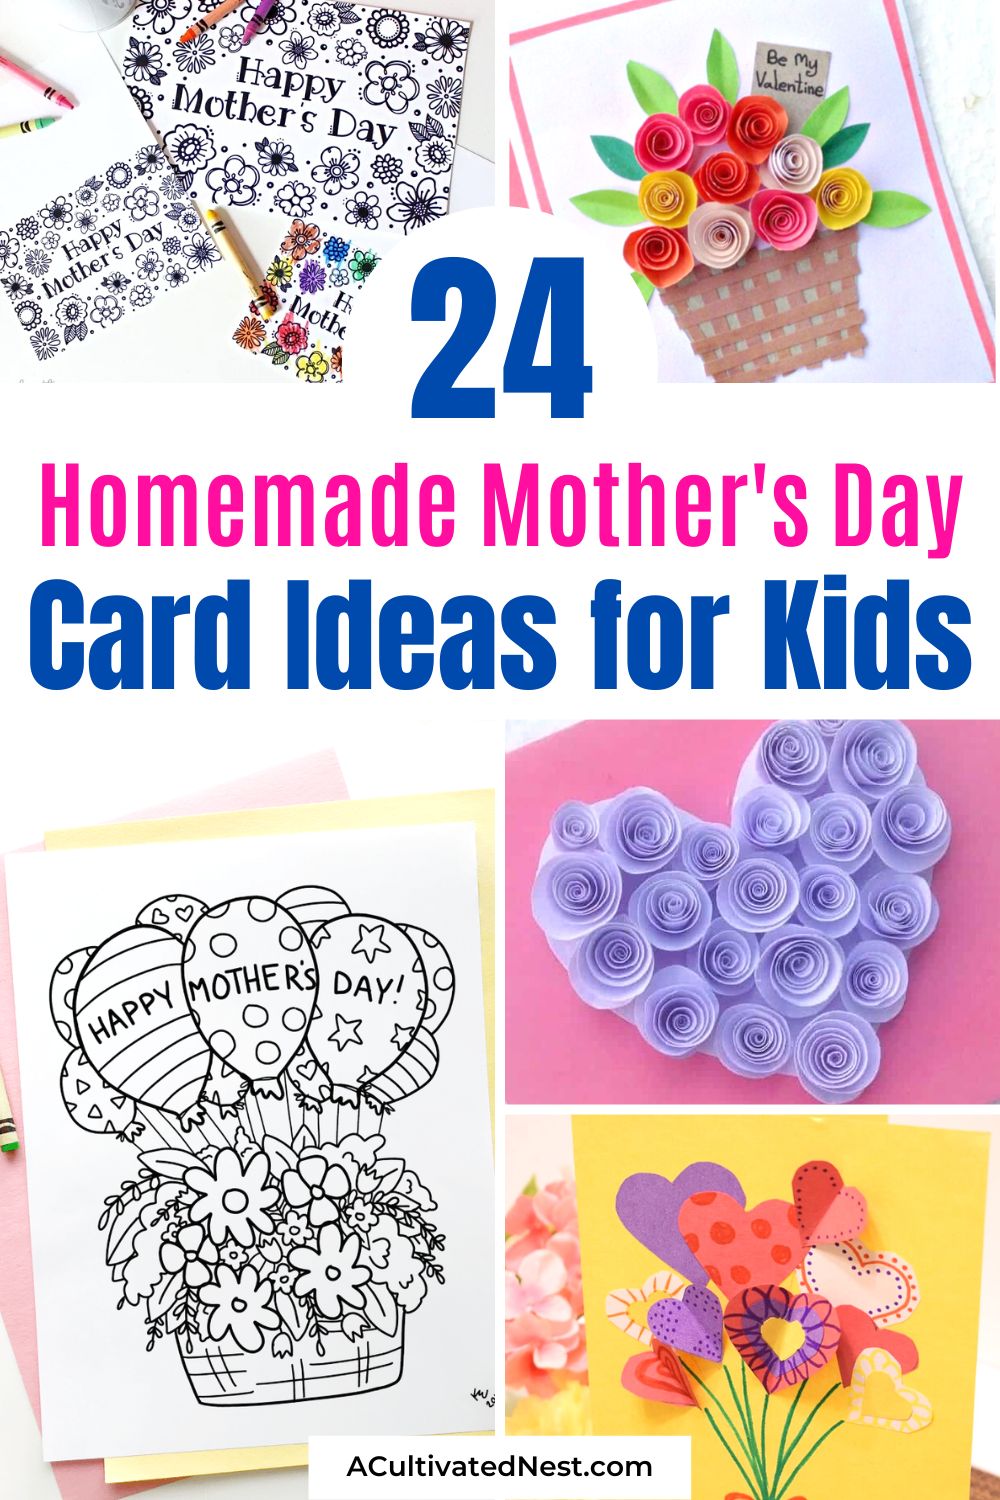 24 Homemade Mother's Day Card Ideas for Kids- Make Mother's Day special with these homemade card ideas for kids! From simple to unique, show mom your love with a handmade card. | #MothersDay #DIYGifts #CraftsForKids #HandmadeCards #ACultivatedNest